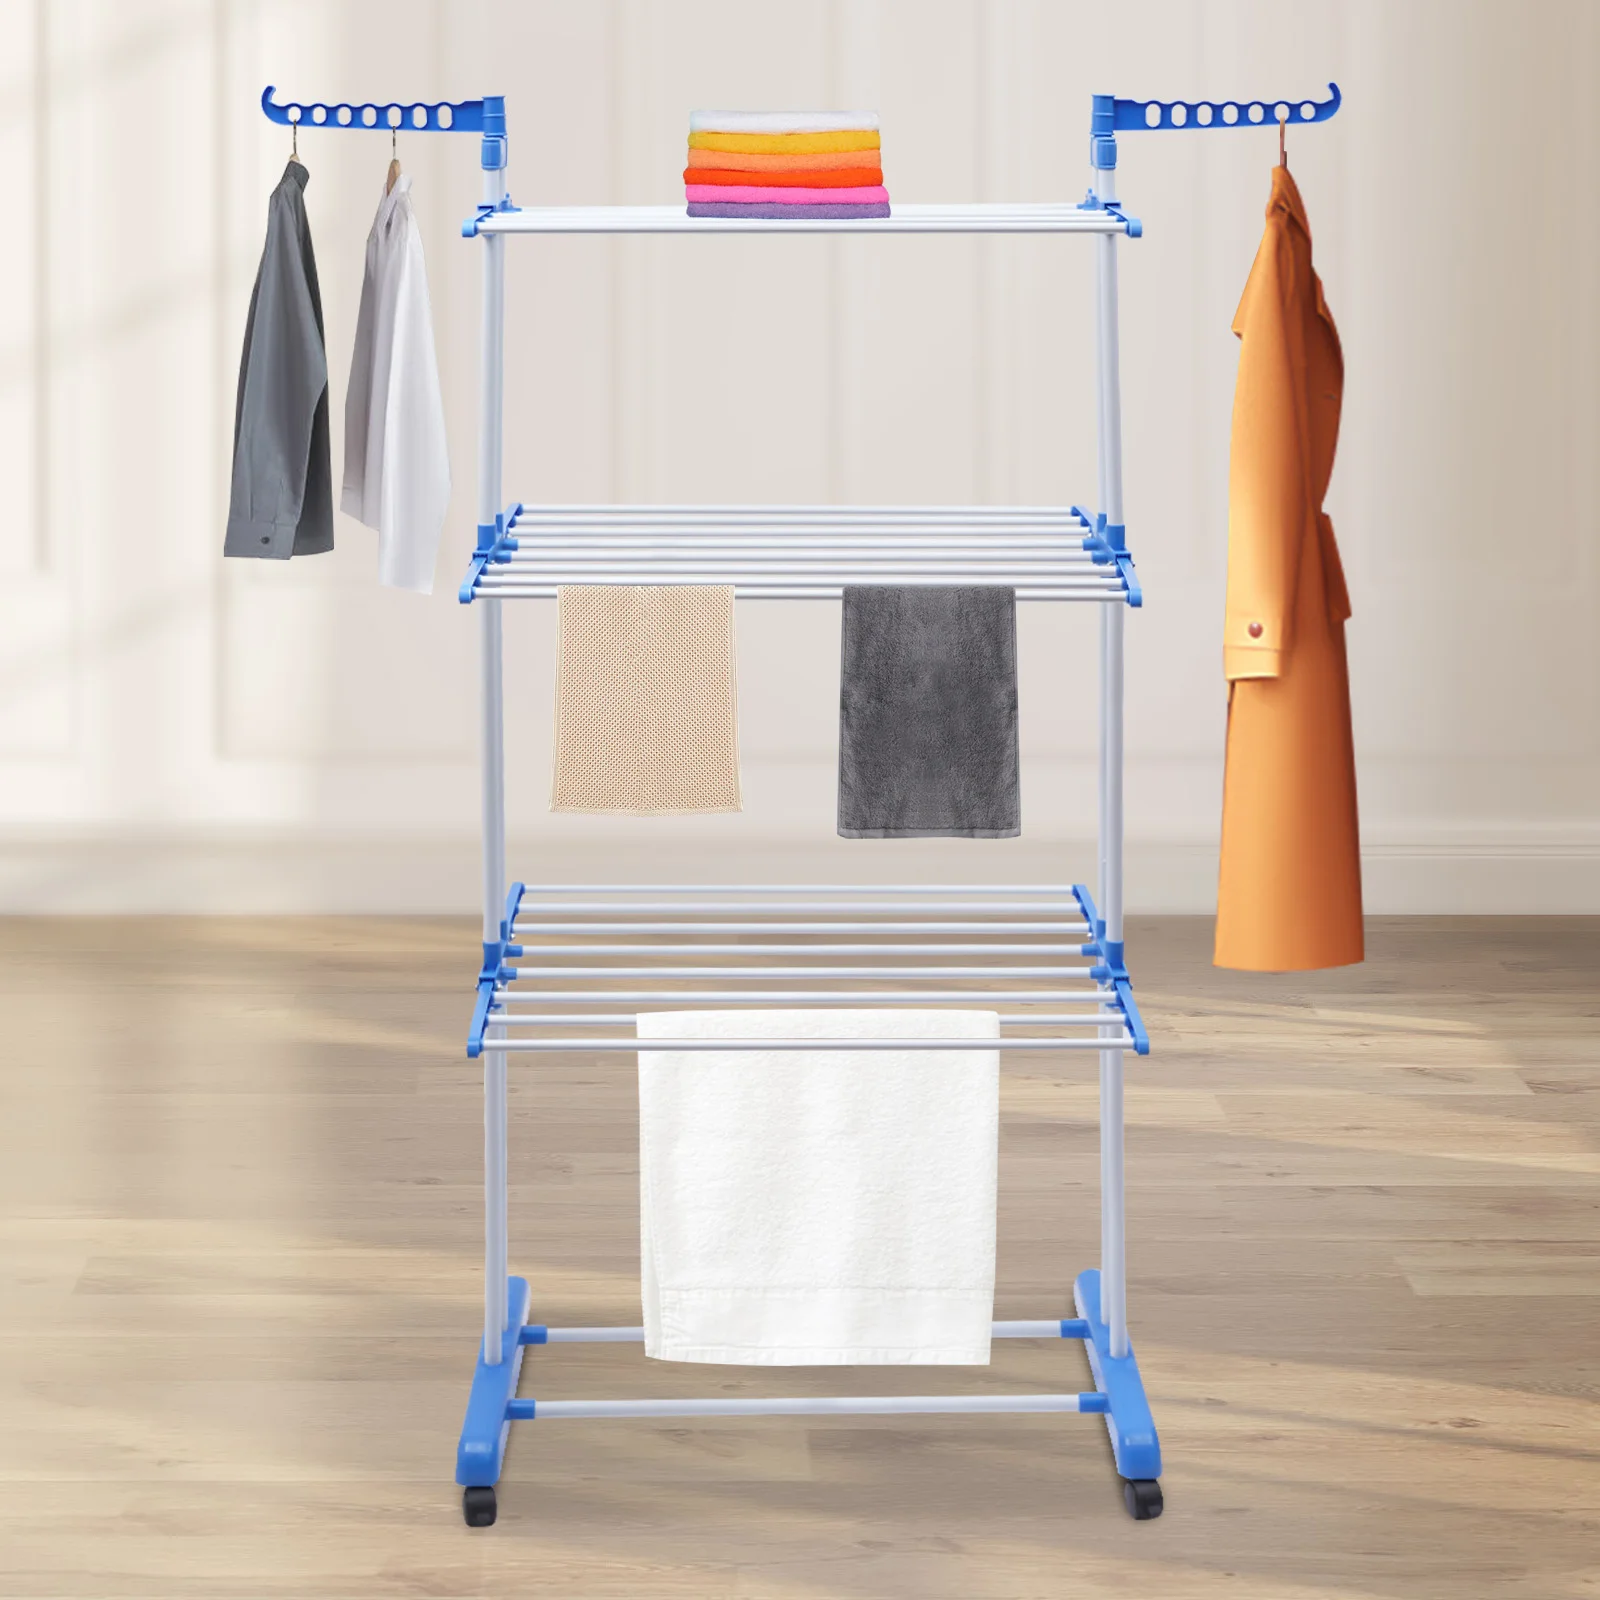 

4-Tier Commercial Laundry Clothes Drying Rack Folding Garment Rolling Dryer Hanger Bedroom Clothing Organizer Shelf Heavy Duty